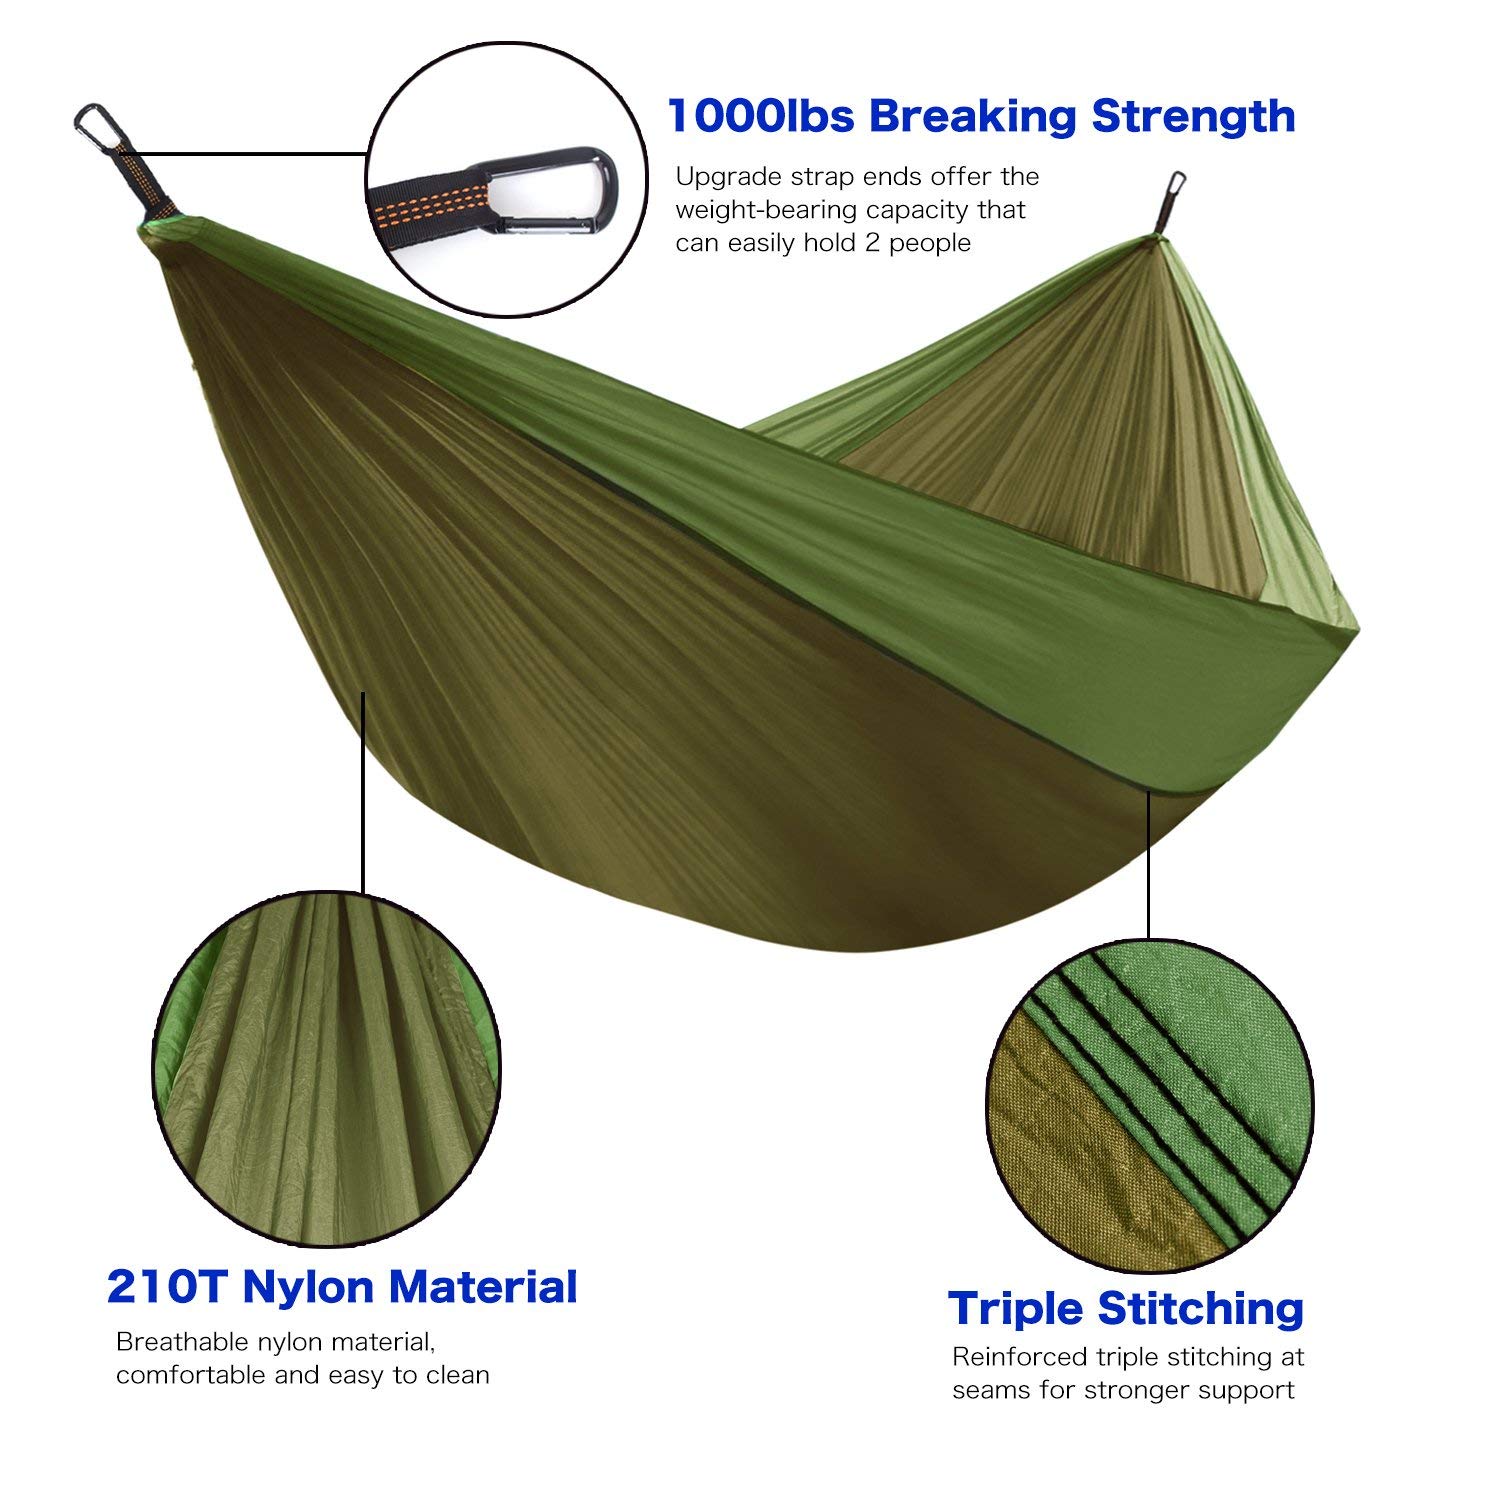 AIOIAI Double Camping Hammock, Portable Lightweight Parachute Nylon Hammock with Tree Straps for Backpacking, Camping, Travel, Beach, Garden 